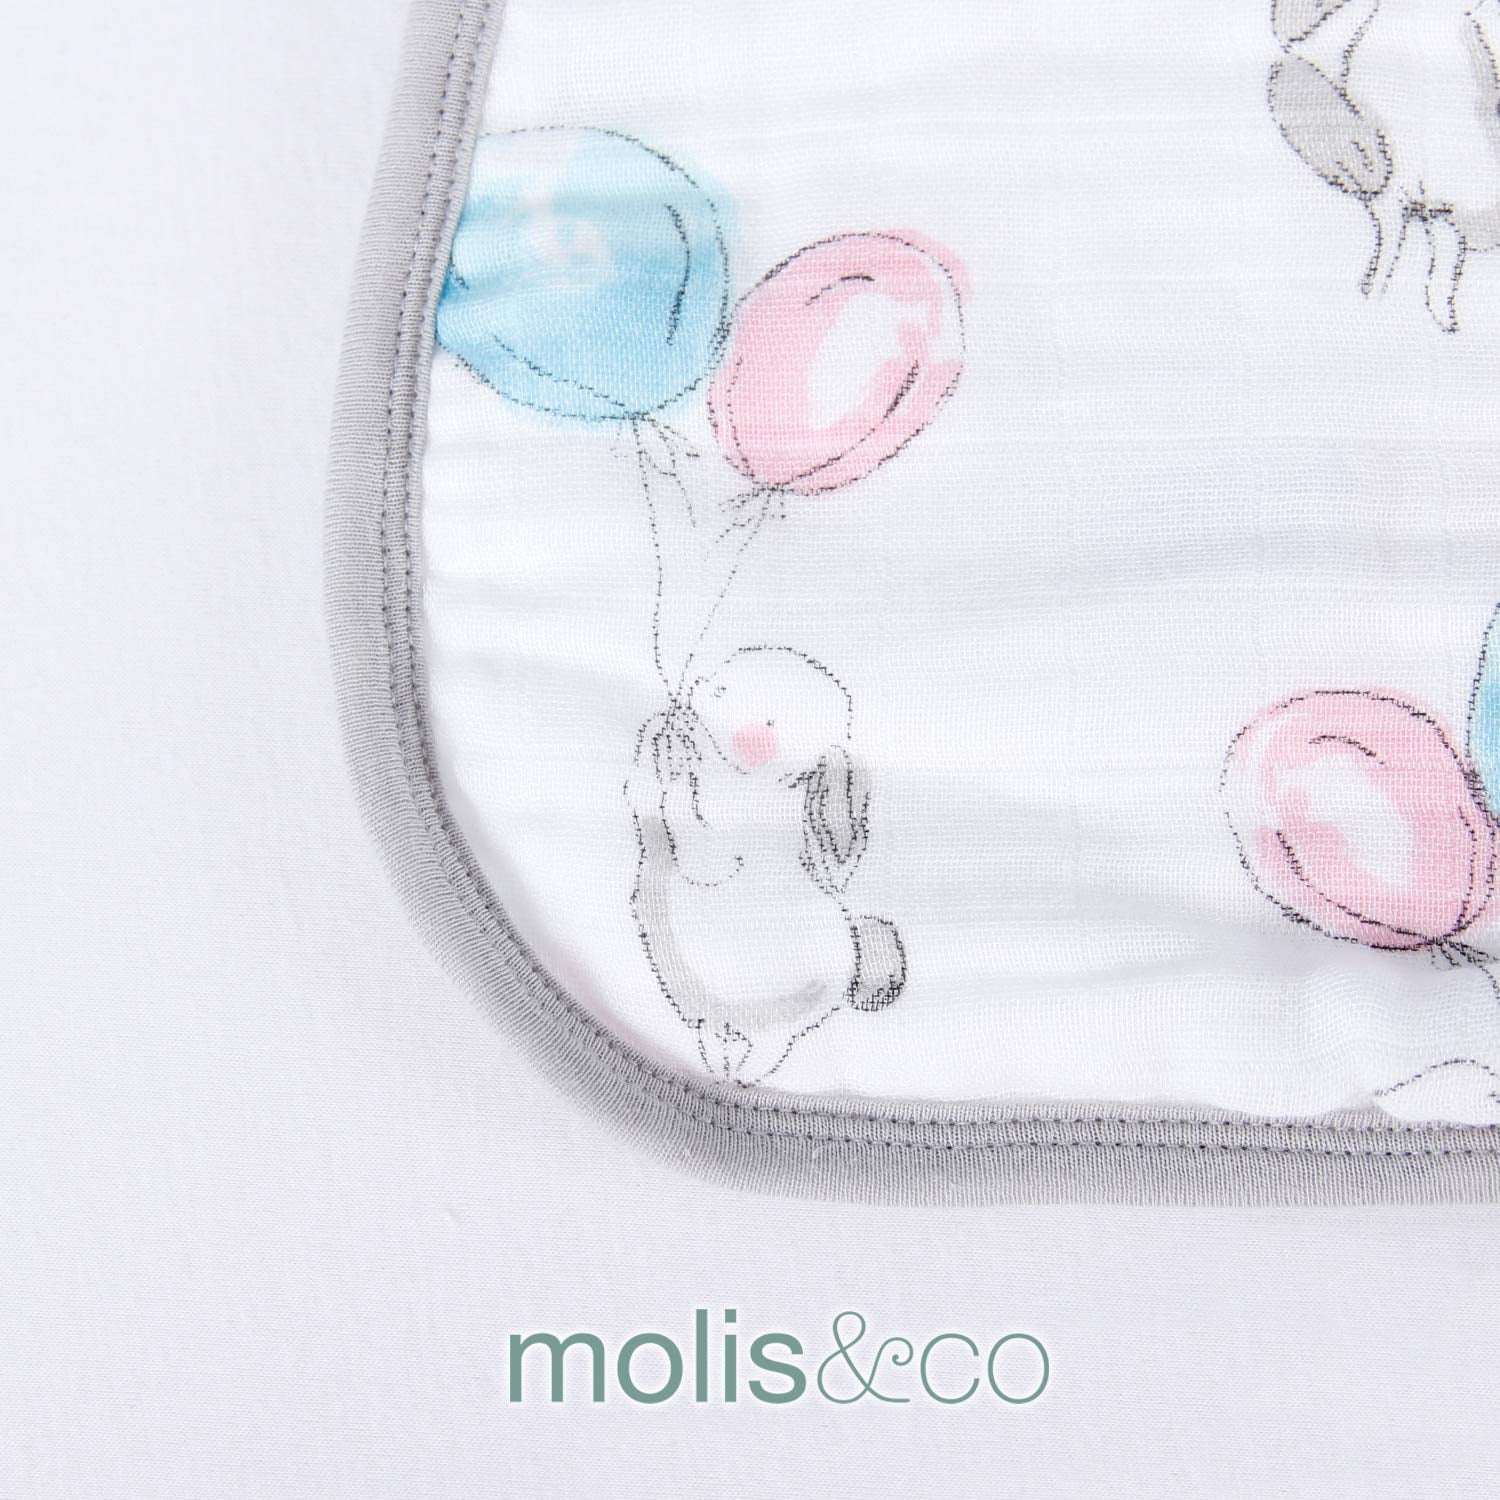  molis & co Toddler Sleeping Sack 2T, Breathable Muslin Baby  Sleeping Bag 18-36 Months, 0.5 TOG Lightweight Unisex Toddler Wearable  Blanket, Blue and Beige : Baby